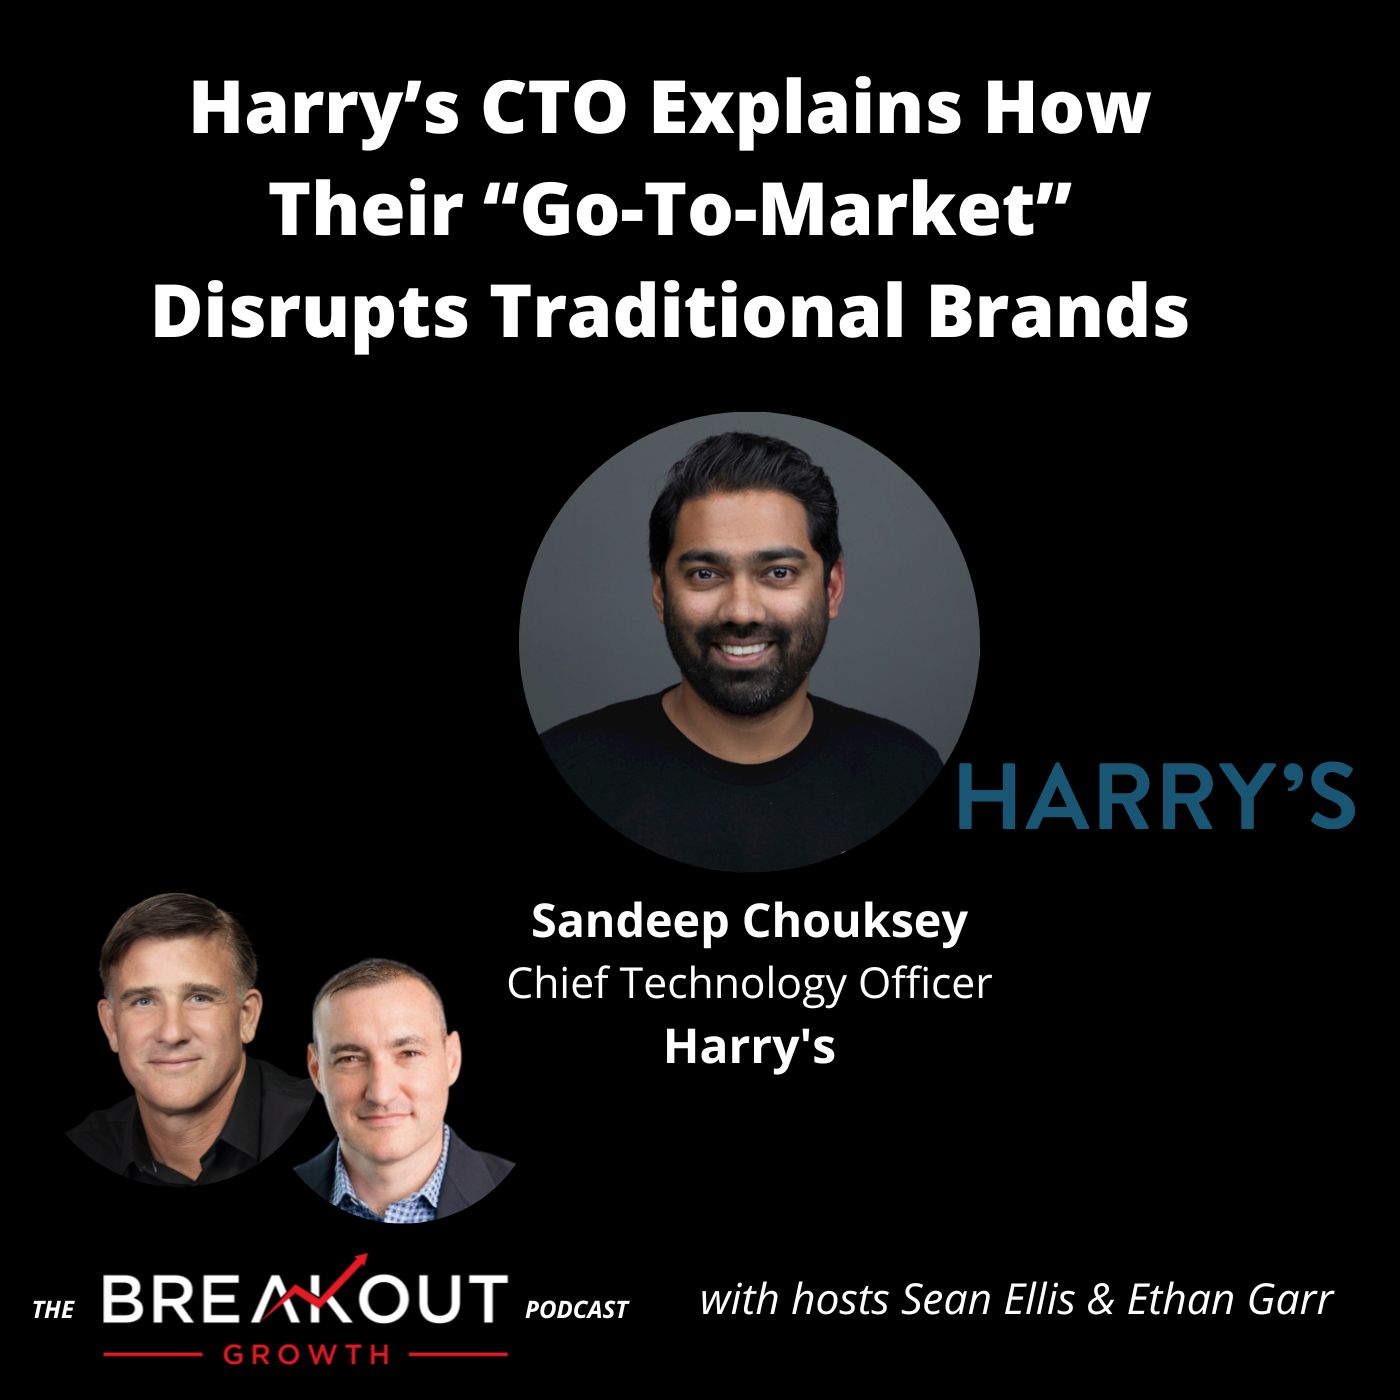 Harry’s CTO Explains How Their “Go-To-Market” Disrupts Traditional Brands